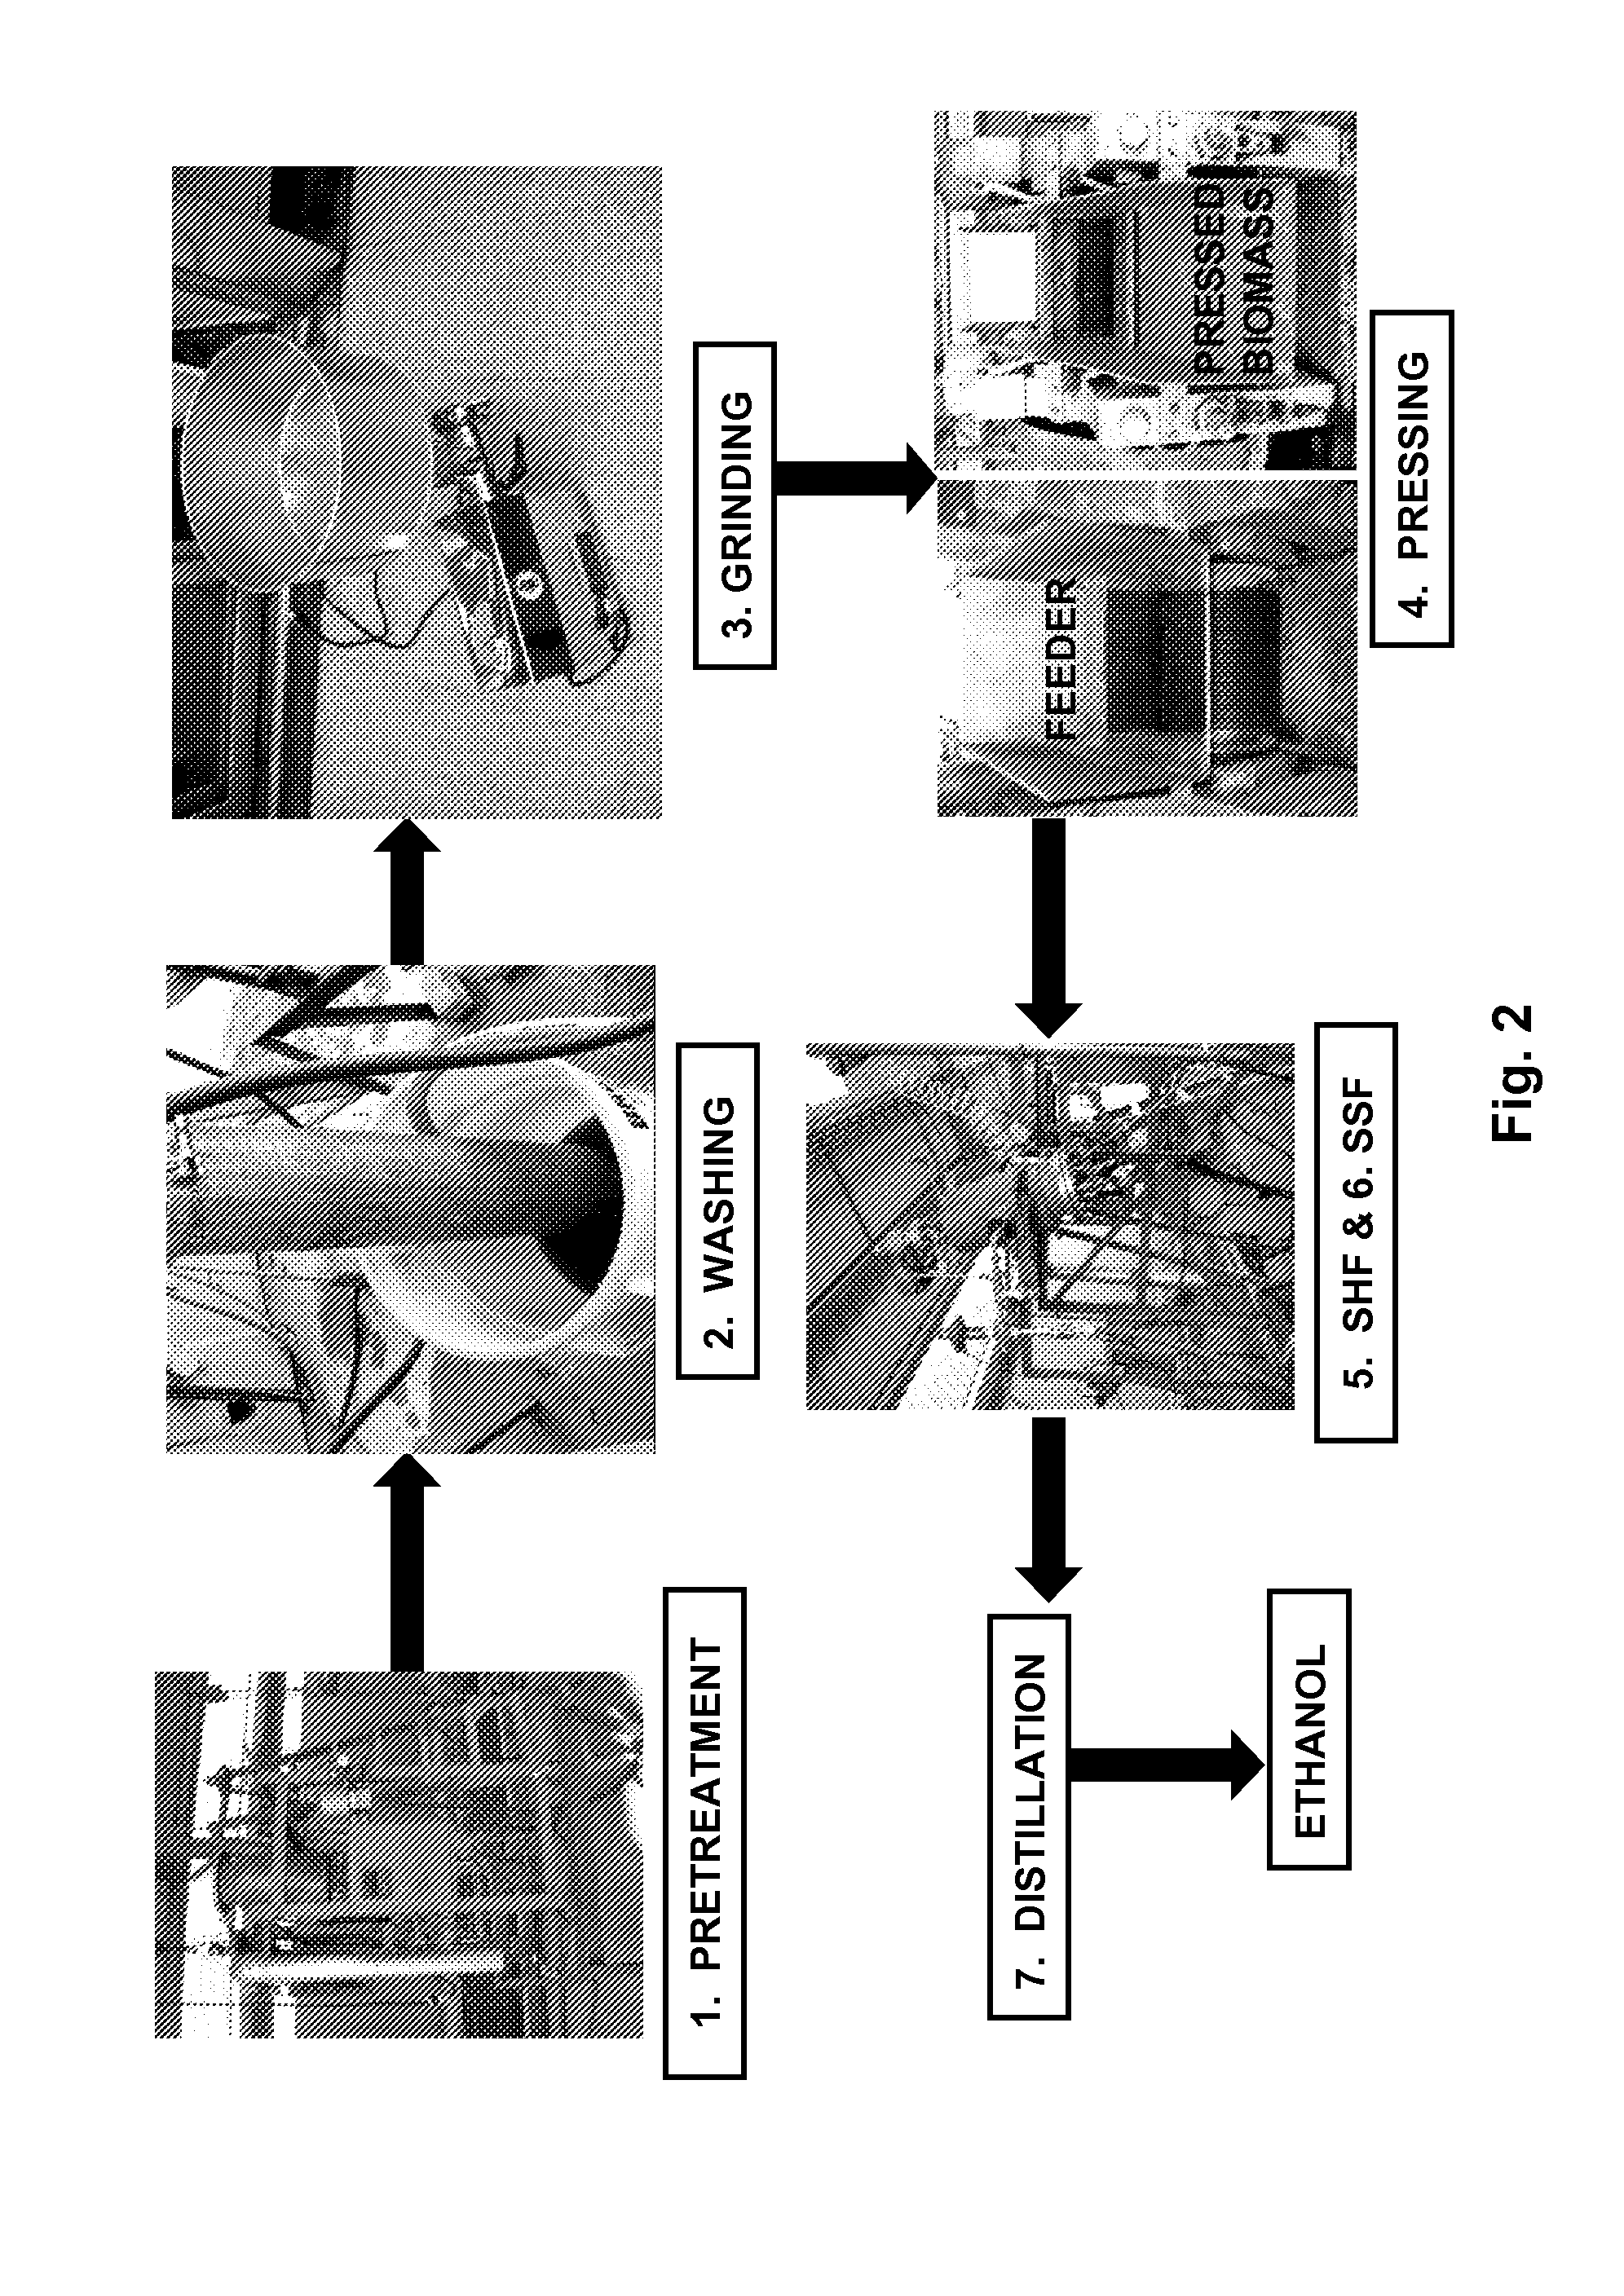 Thermochemical Treatment of Lignocellulosics for the Production of Ethanol